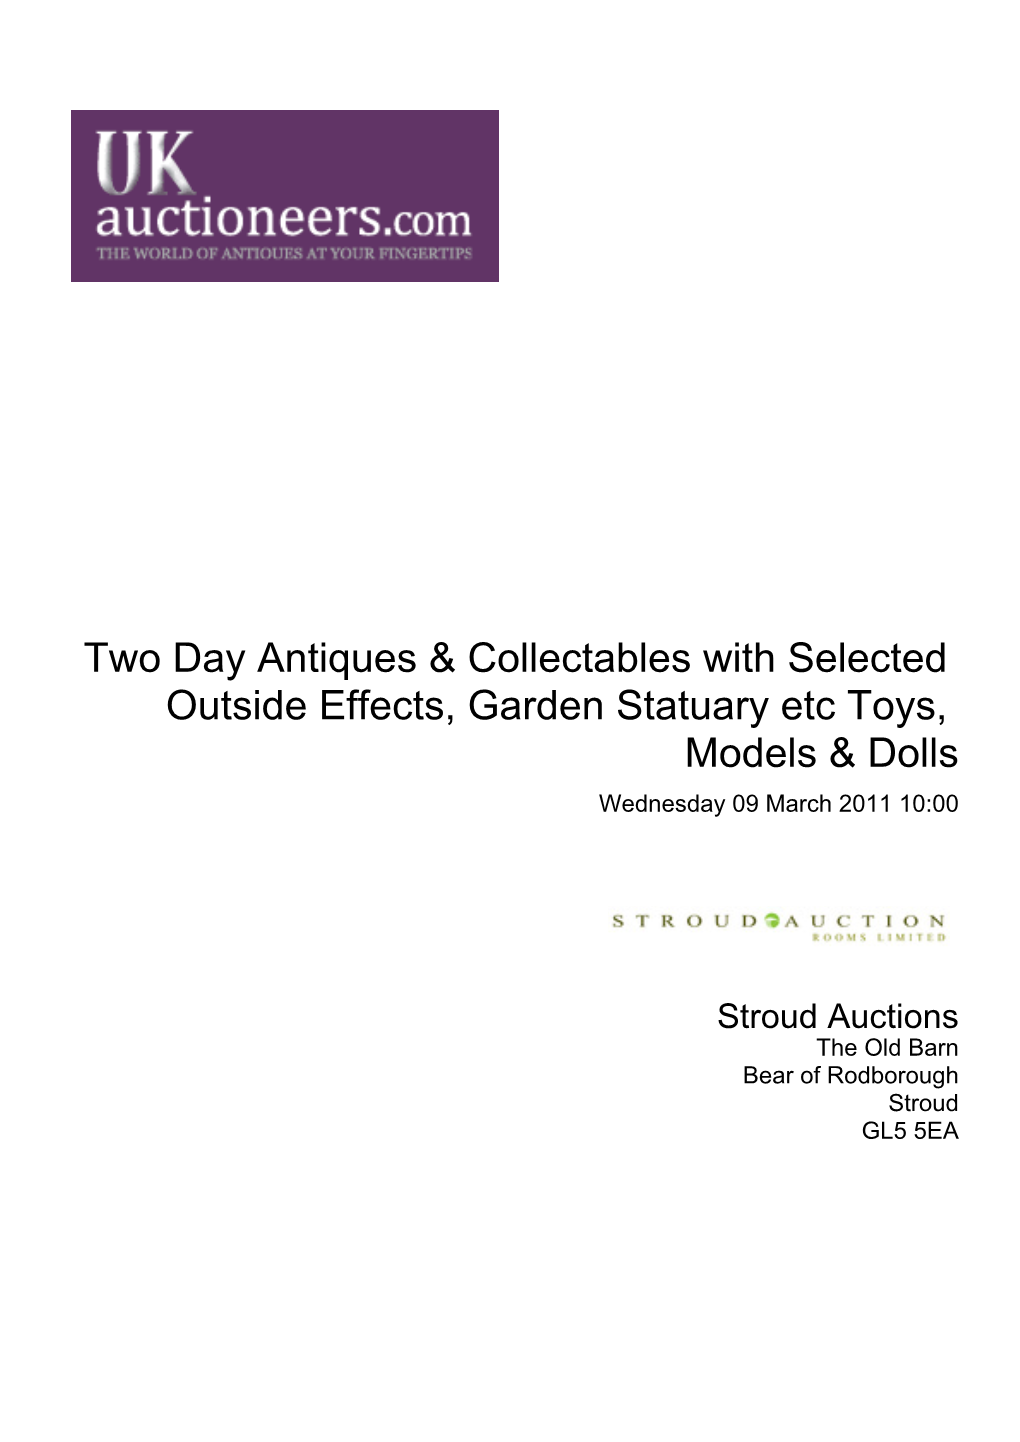 Two Day Antiques & Collectables with Selected Outside Effects, Garden Statuary Etc Toys, Models & Dolls